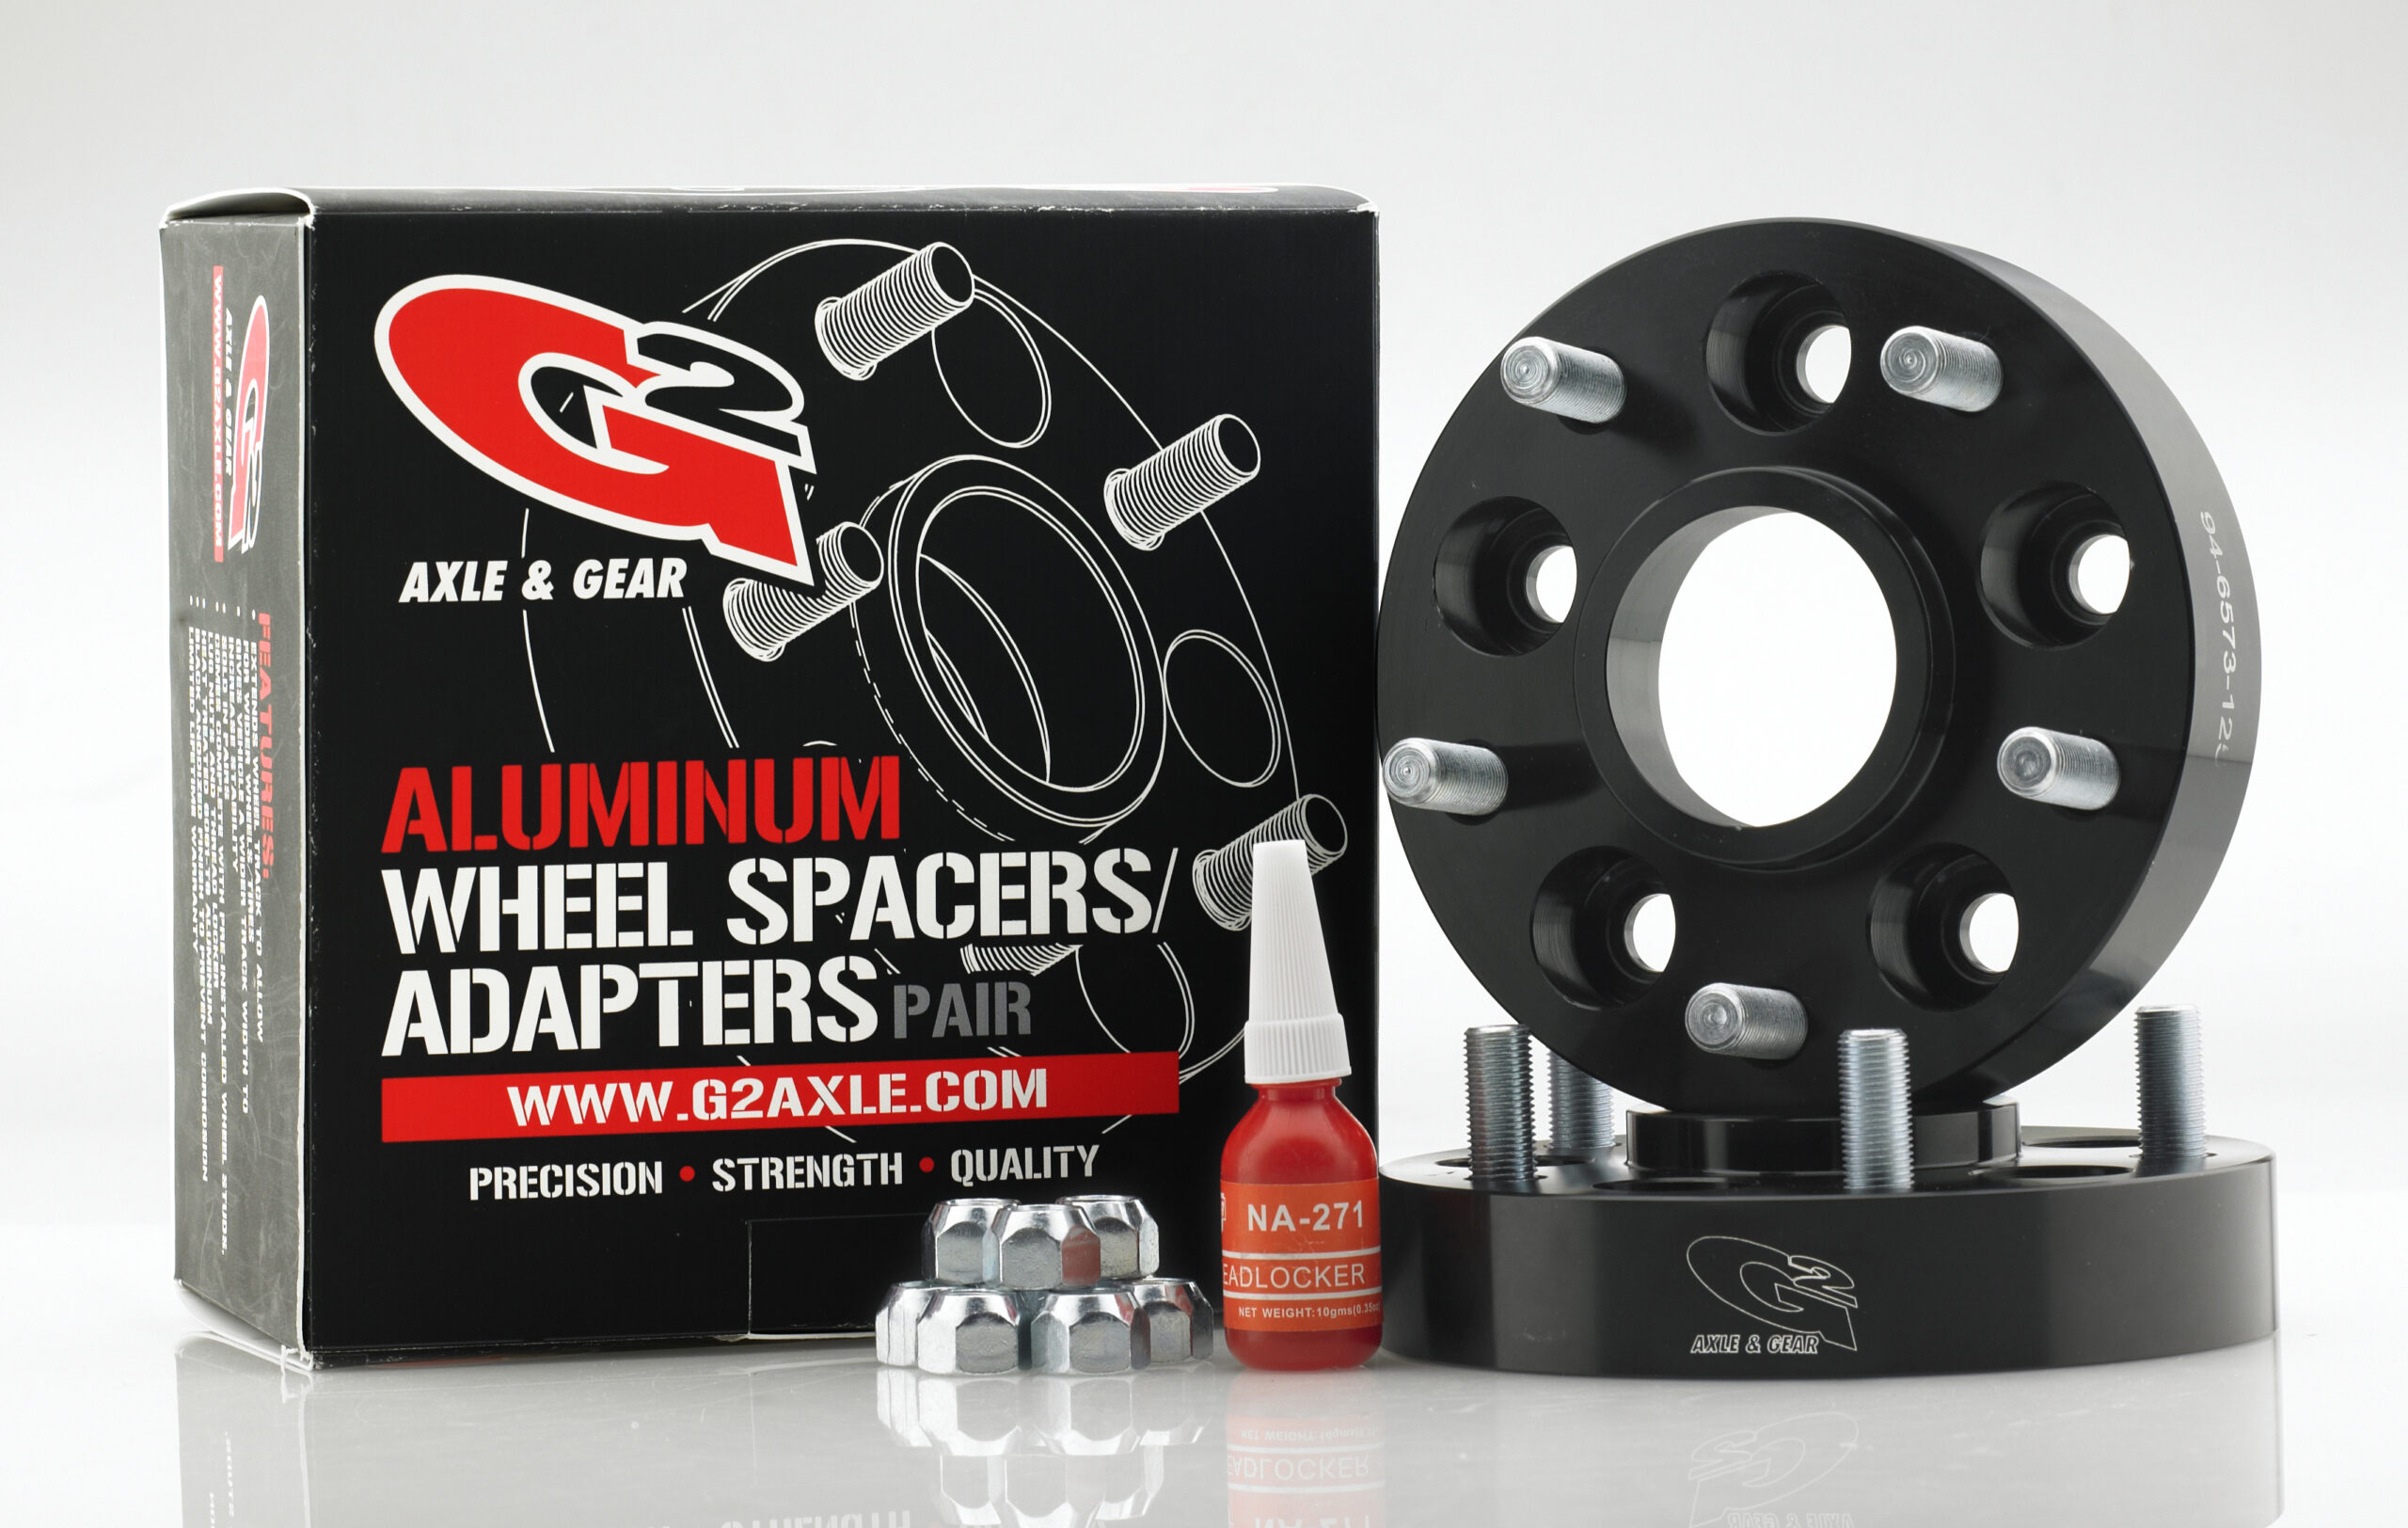 New G2 Aluminum Wheel Spacers and Adapters